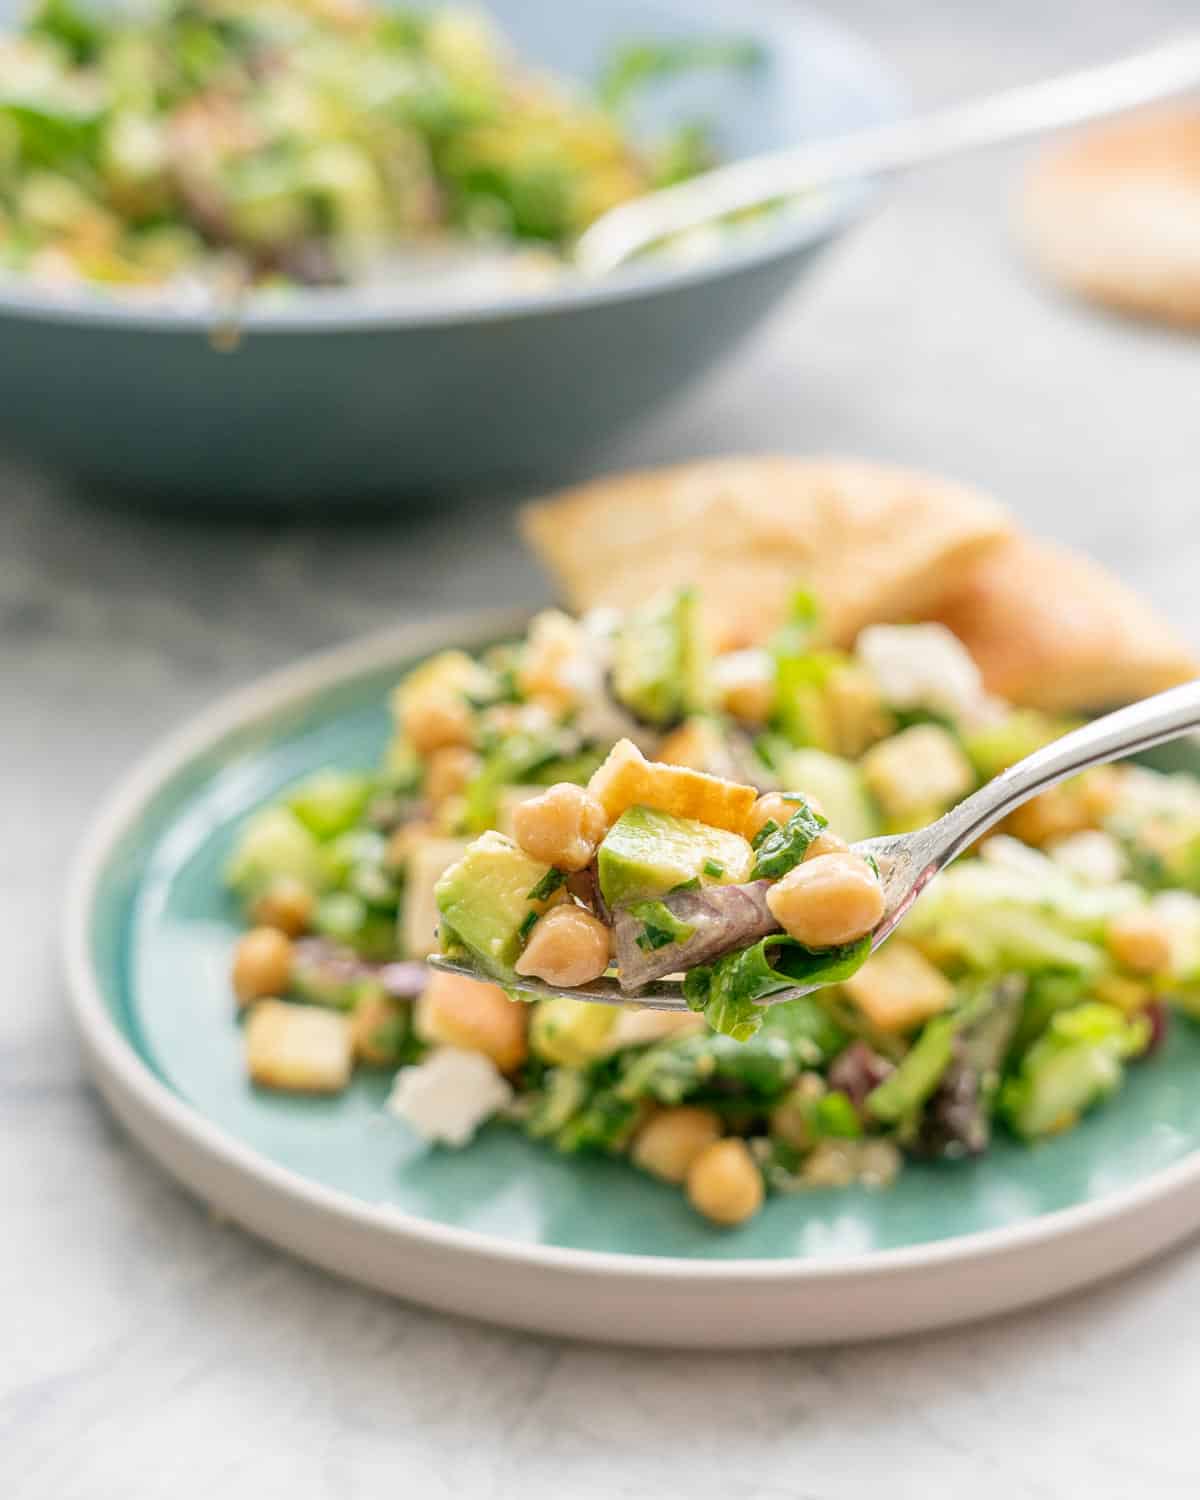 A forkful of salad with chickpeas, avocado, feta and green vegetables on a fork. 